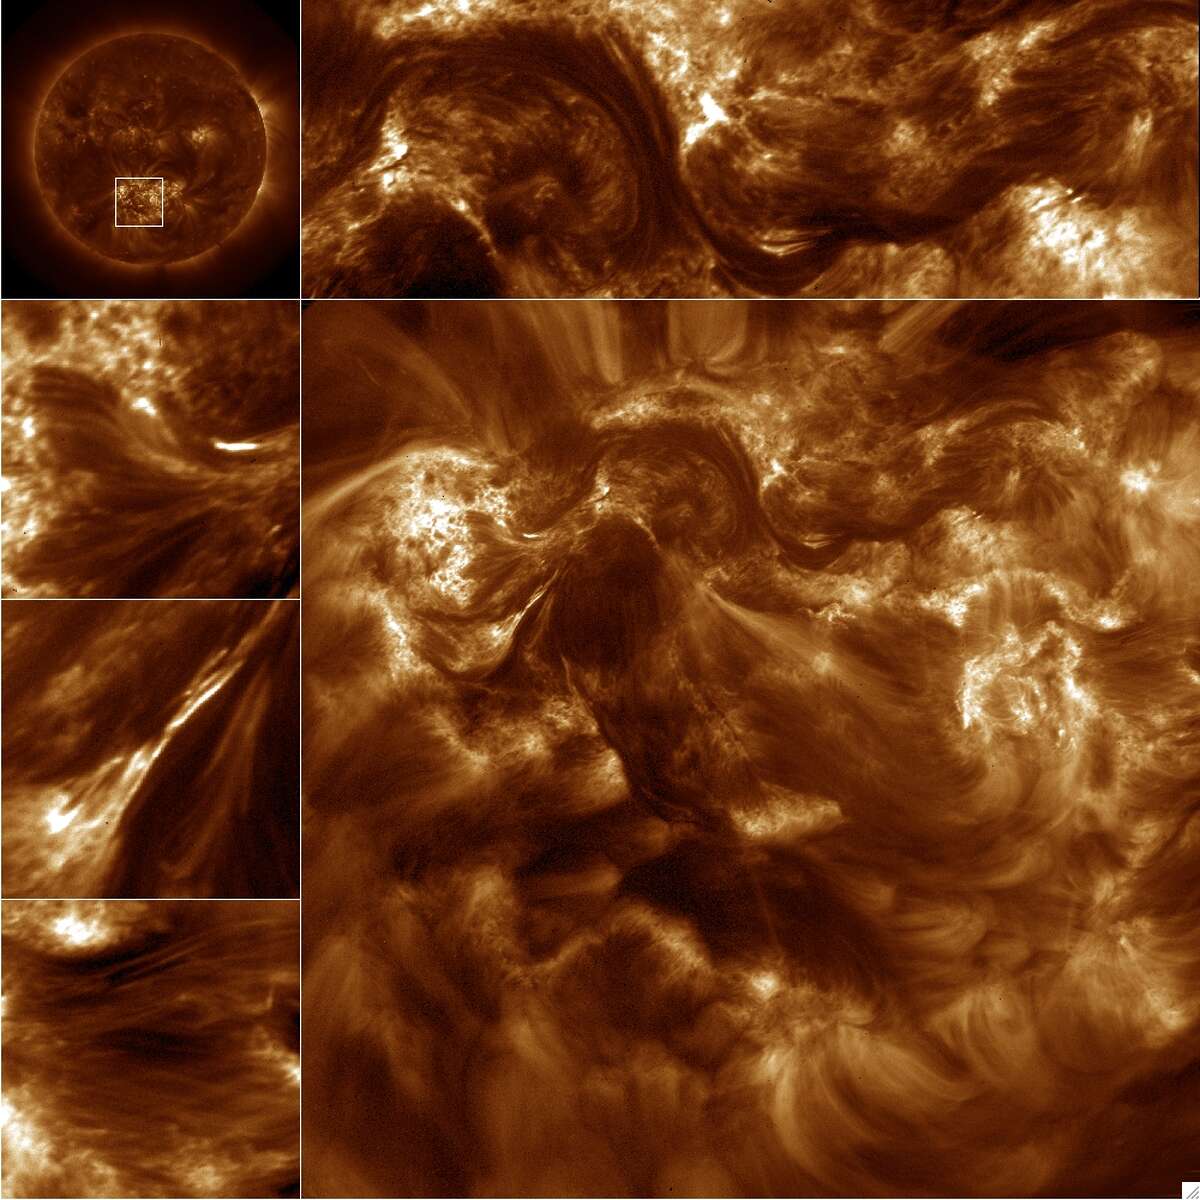 From NASA: The Hi-resolution Coronal Imager full resolution image shown here is from the solar active region outlined in the AIA image (upper left). Several partial frame images are shown including a portion of a filament channel (upper center/right), the braided ensemble (left, second from top), an example of magnetic recognition and flaring (left, third from top), and fine stranded loops (left, bottom). These Hi-C images are at a resolution of 0.2" or 90 miles. This resolution is the equivalent of resolving a dime from 10 miles away.